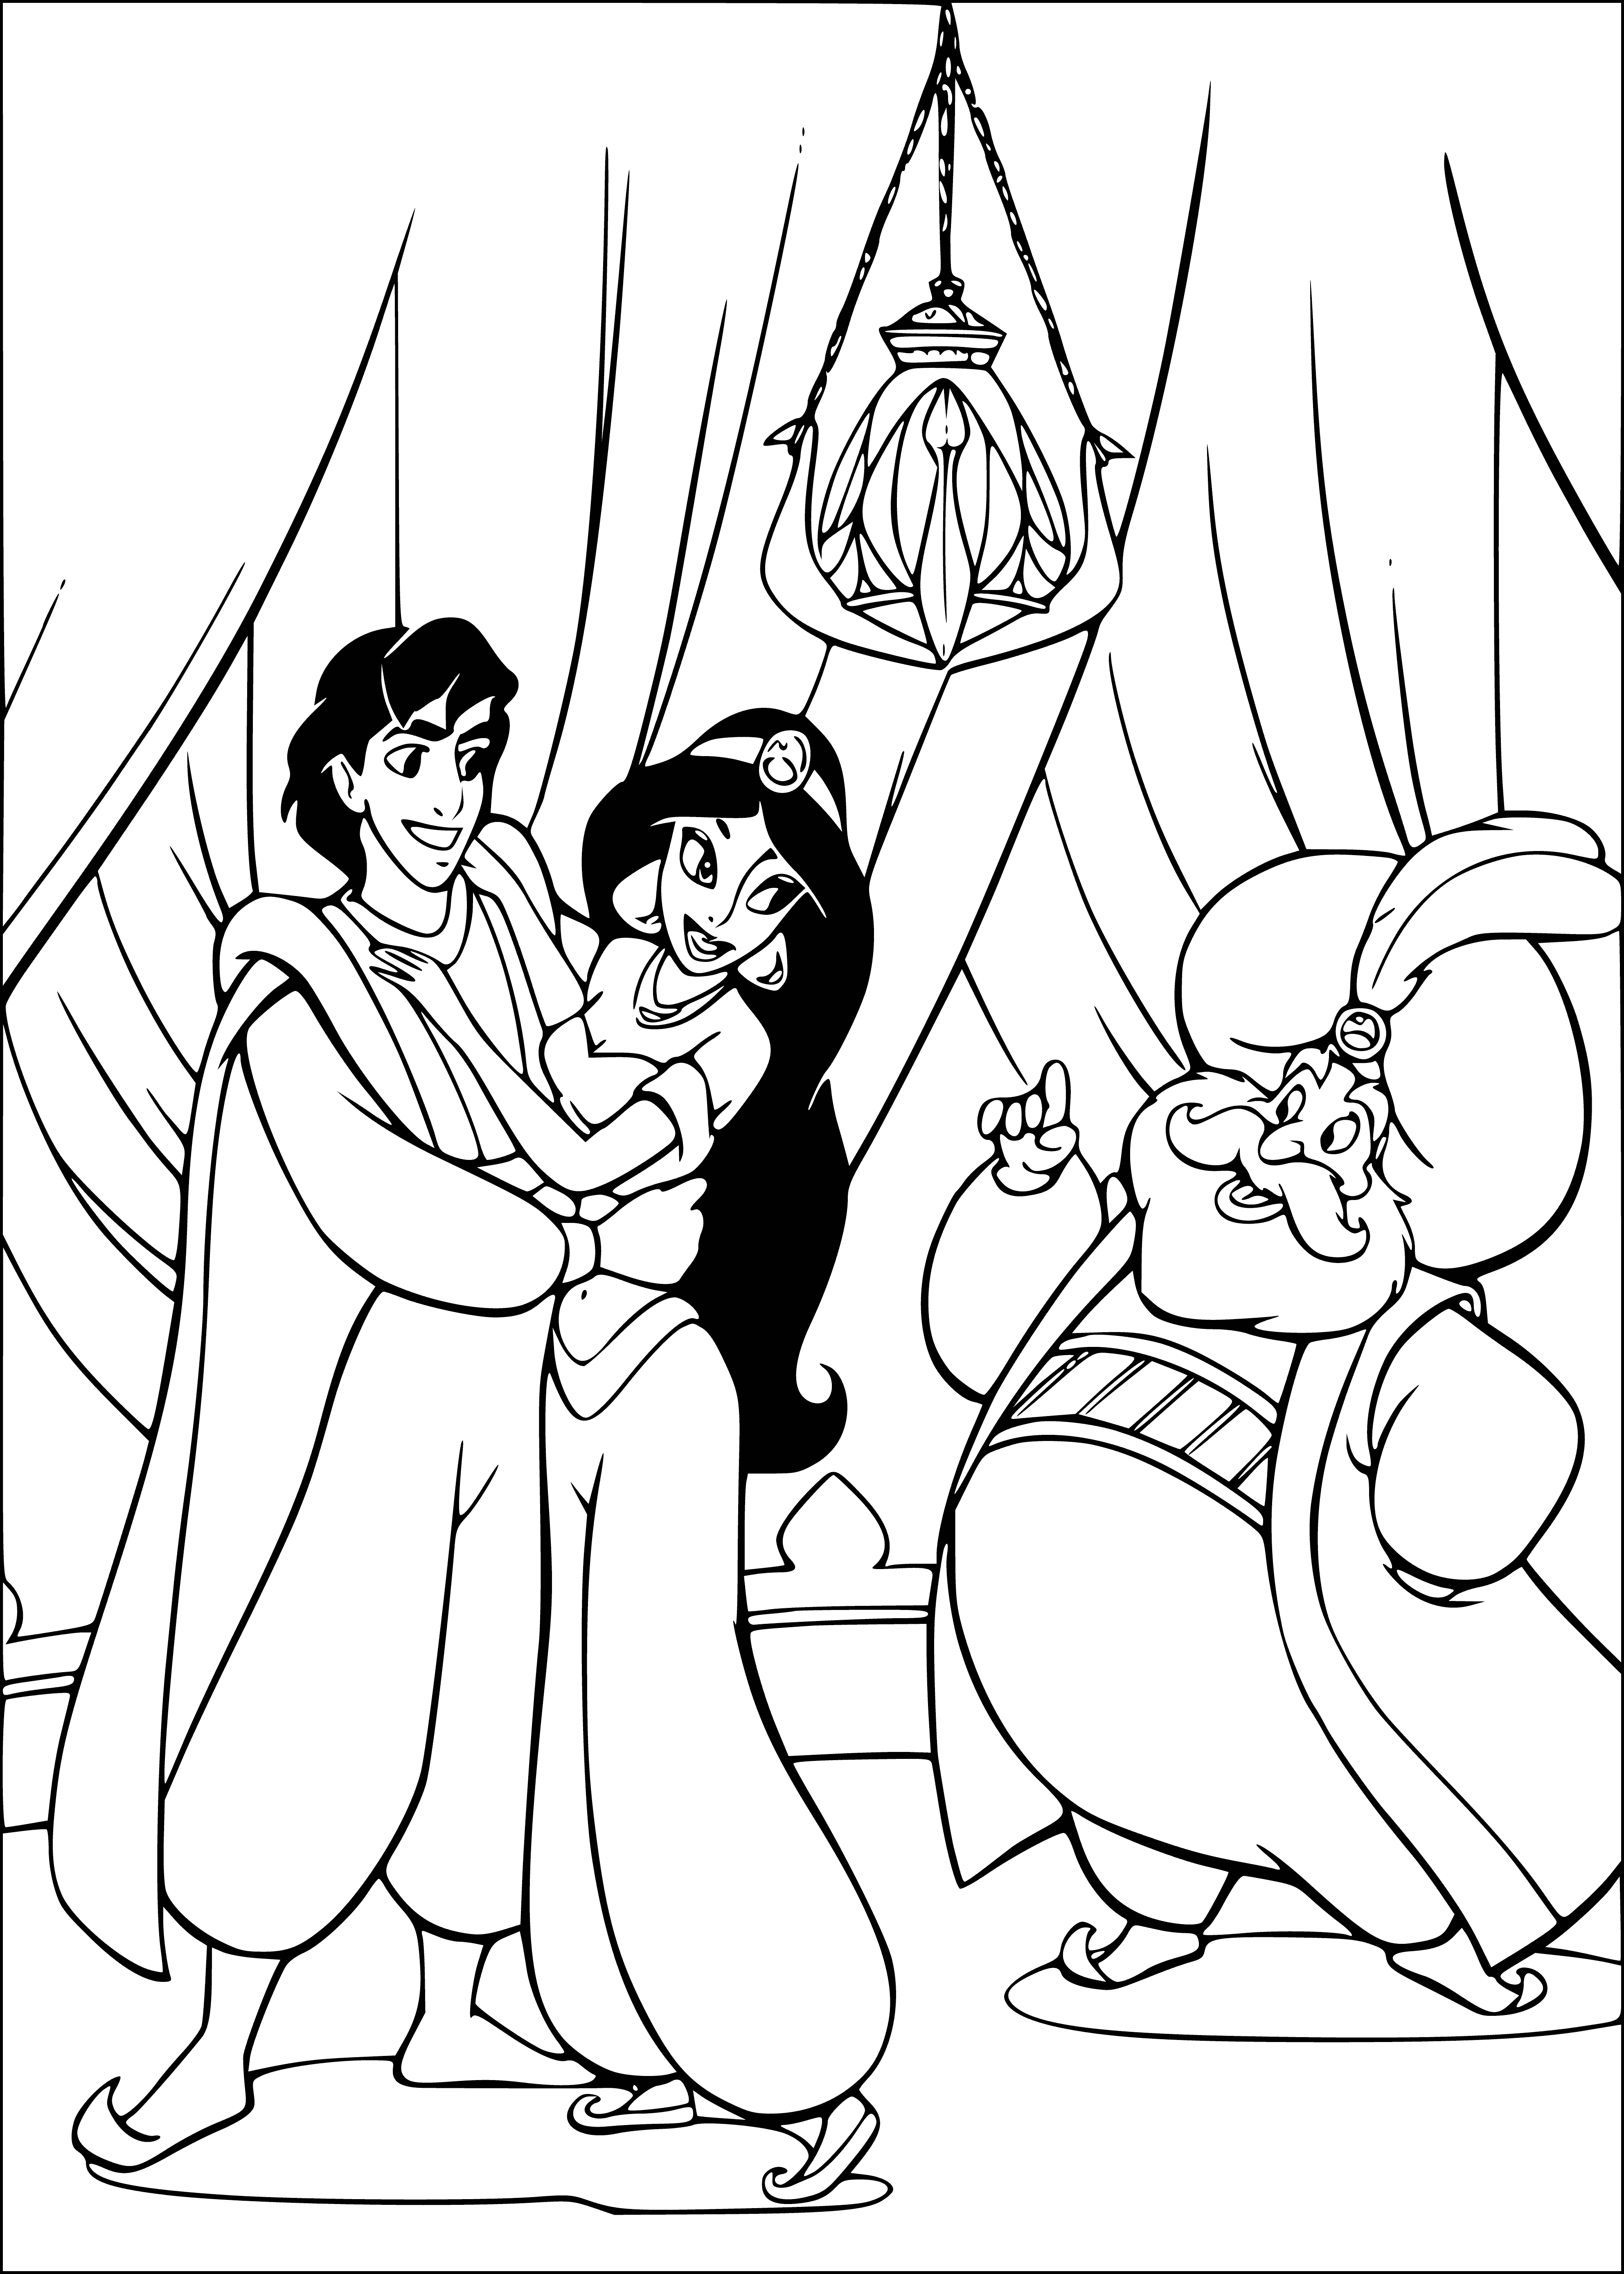 coloring page: Jasmine and Aladdin look lovingly at each other, hands clasped, he on his knees and her seated on a rock.